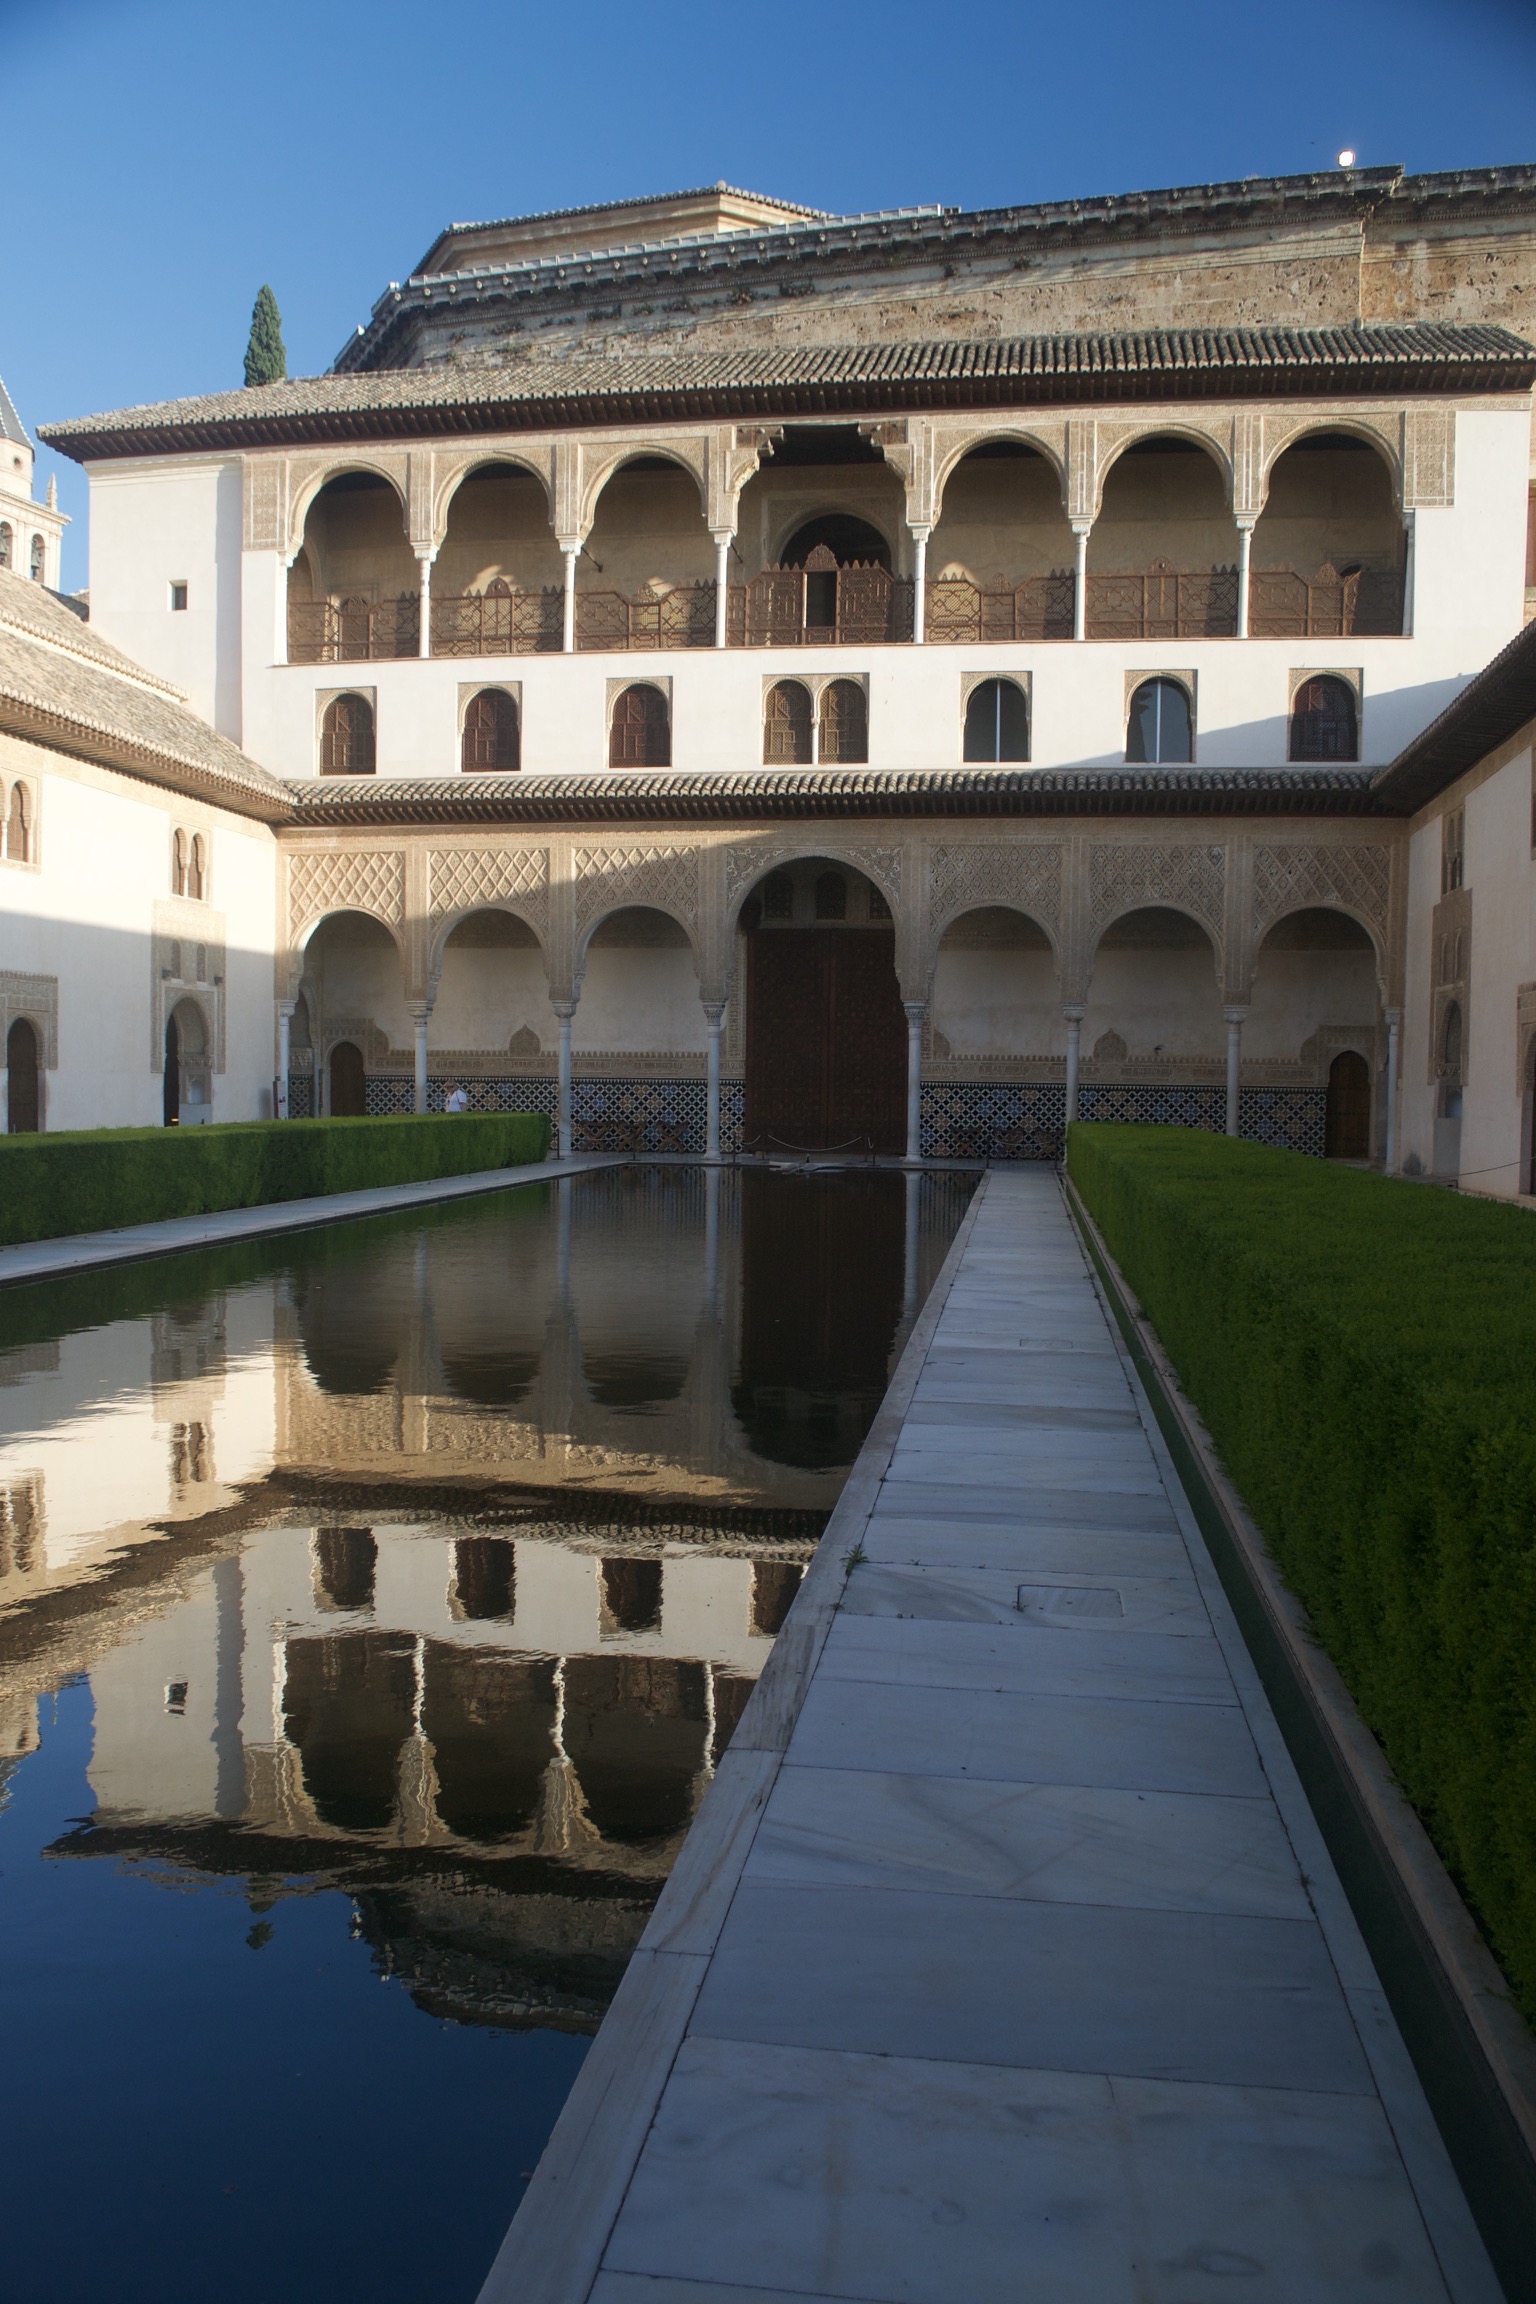 A still reflecting pool mirrors a surrounding two-storied building.